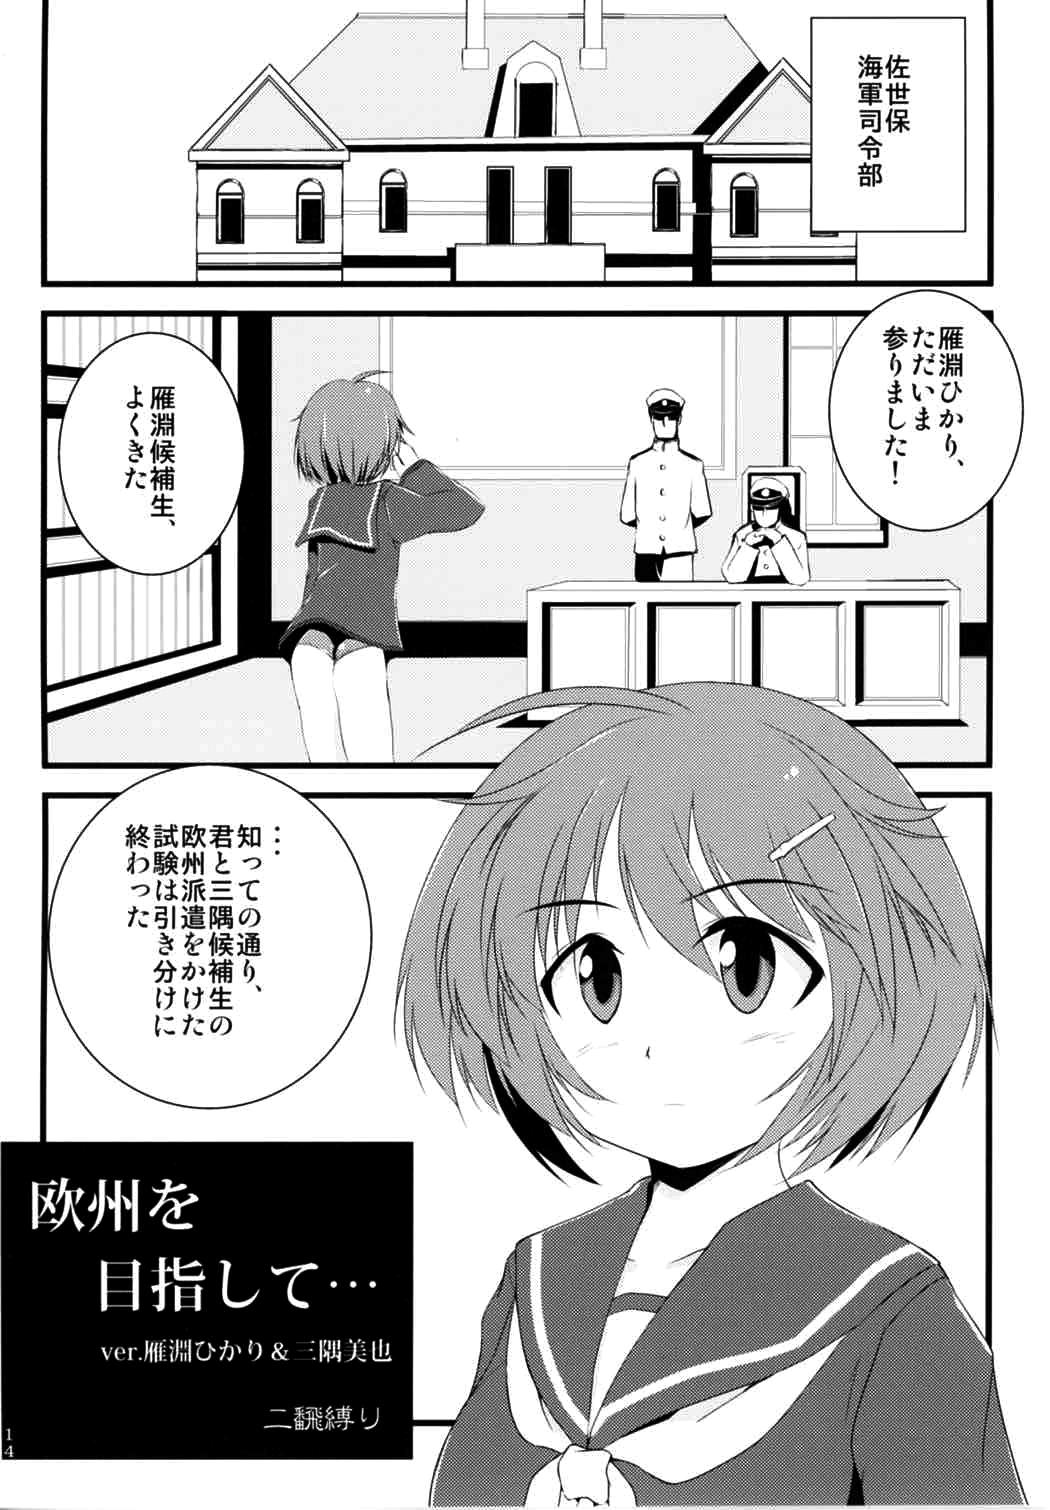 Pov Sex 502 Bad Gateway - Brave witches Gay Sex - Page 6